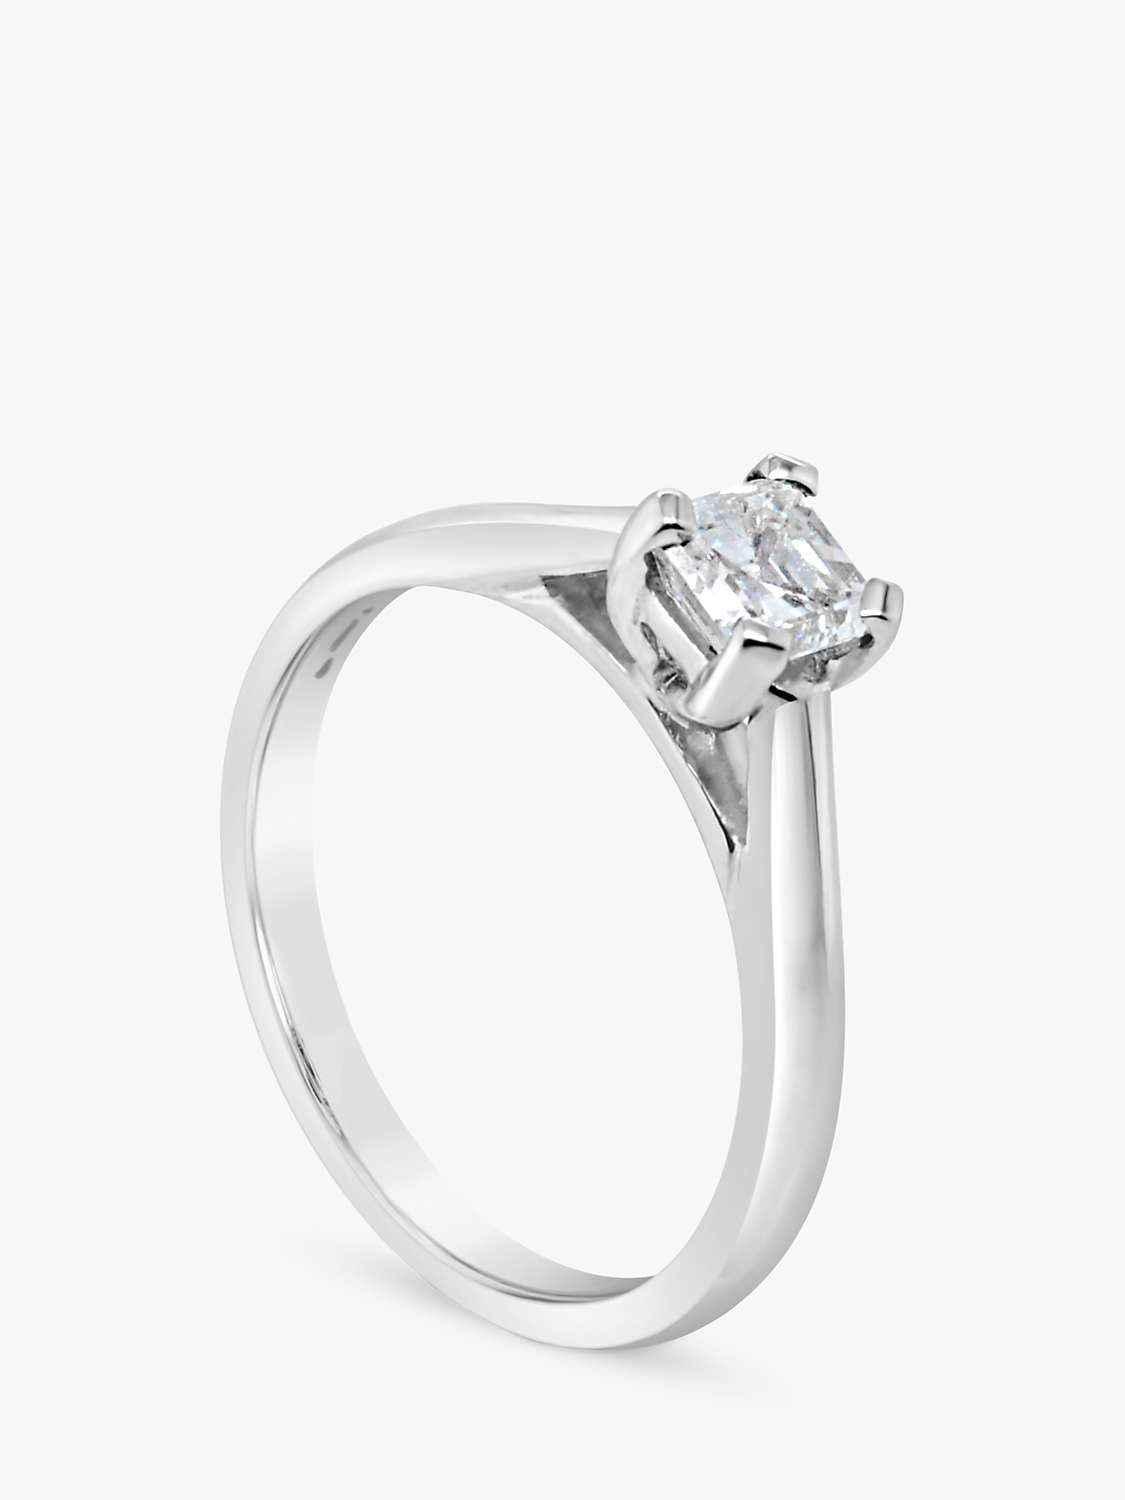 Buy Milton & Humble Jewellery Second Hand 18ct White Gold Emerald Cut Diamond Engagement Ring Online at johnlewis.com